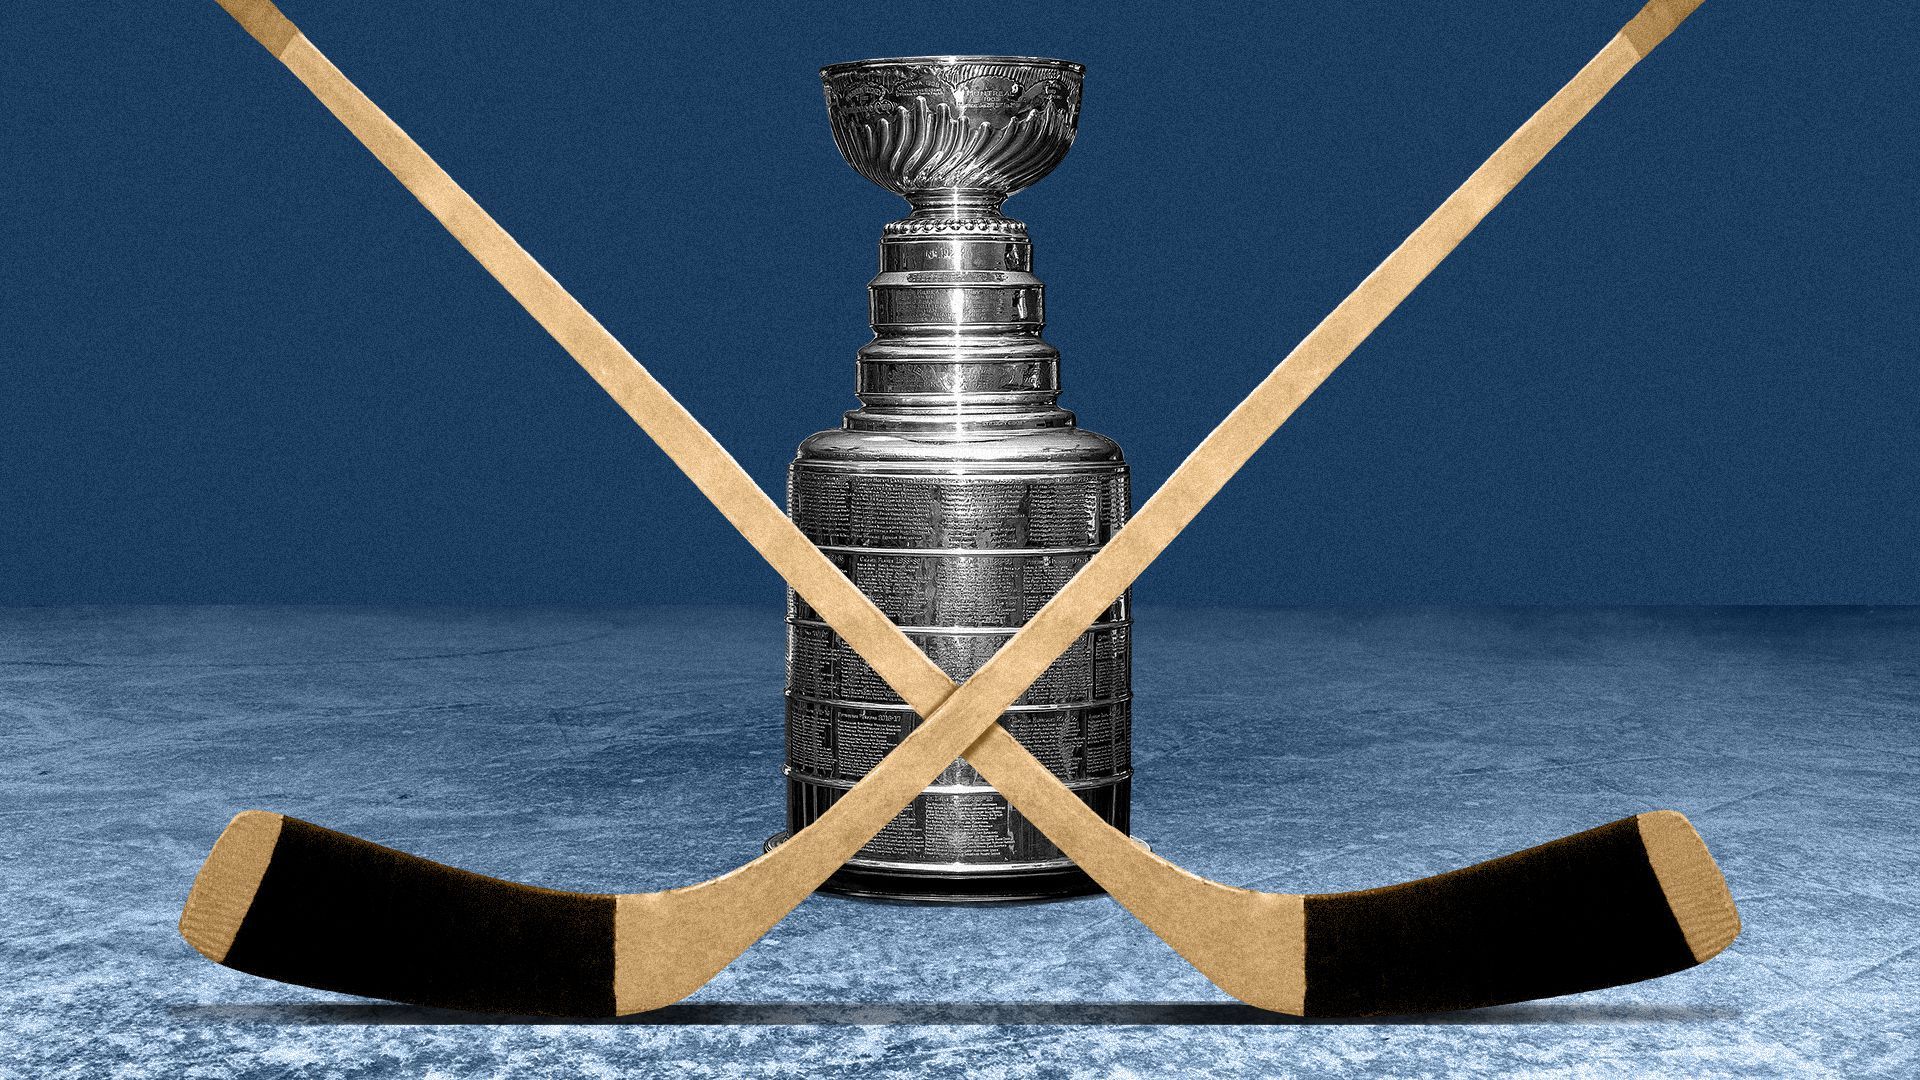 Illustration of two hockey sticks in front of the Stanley Cup on ice.